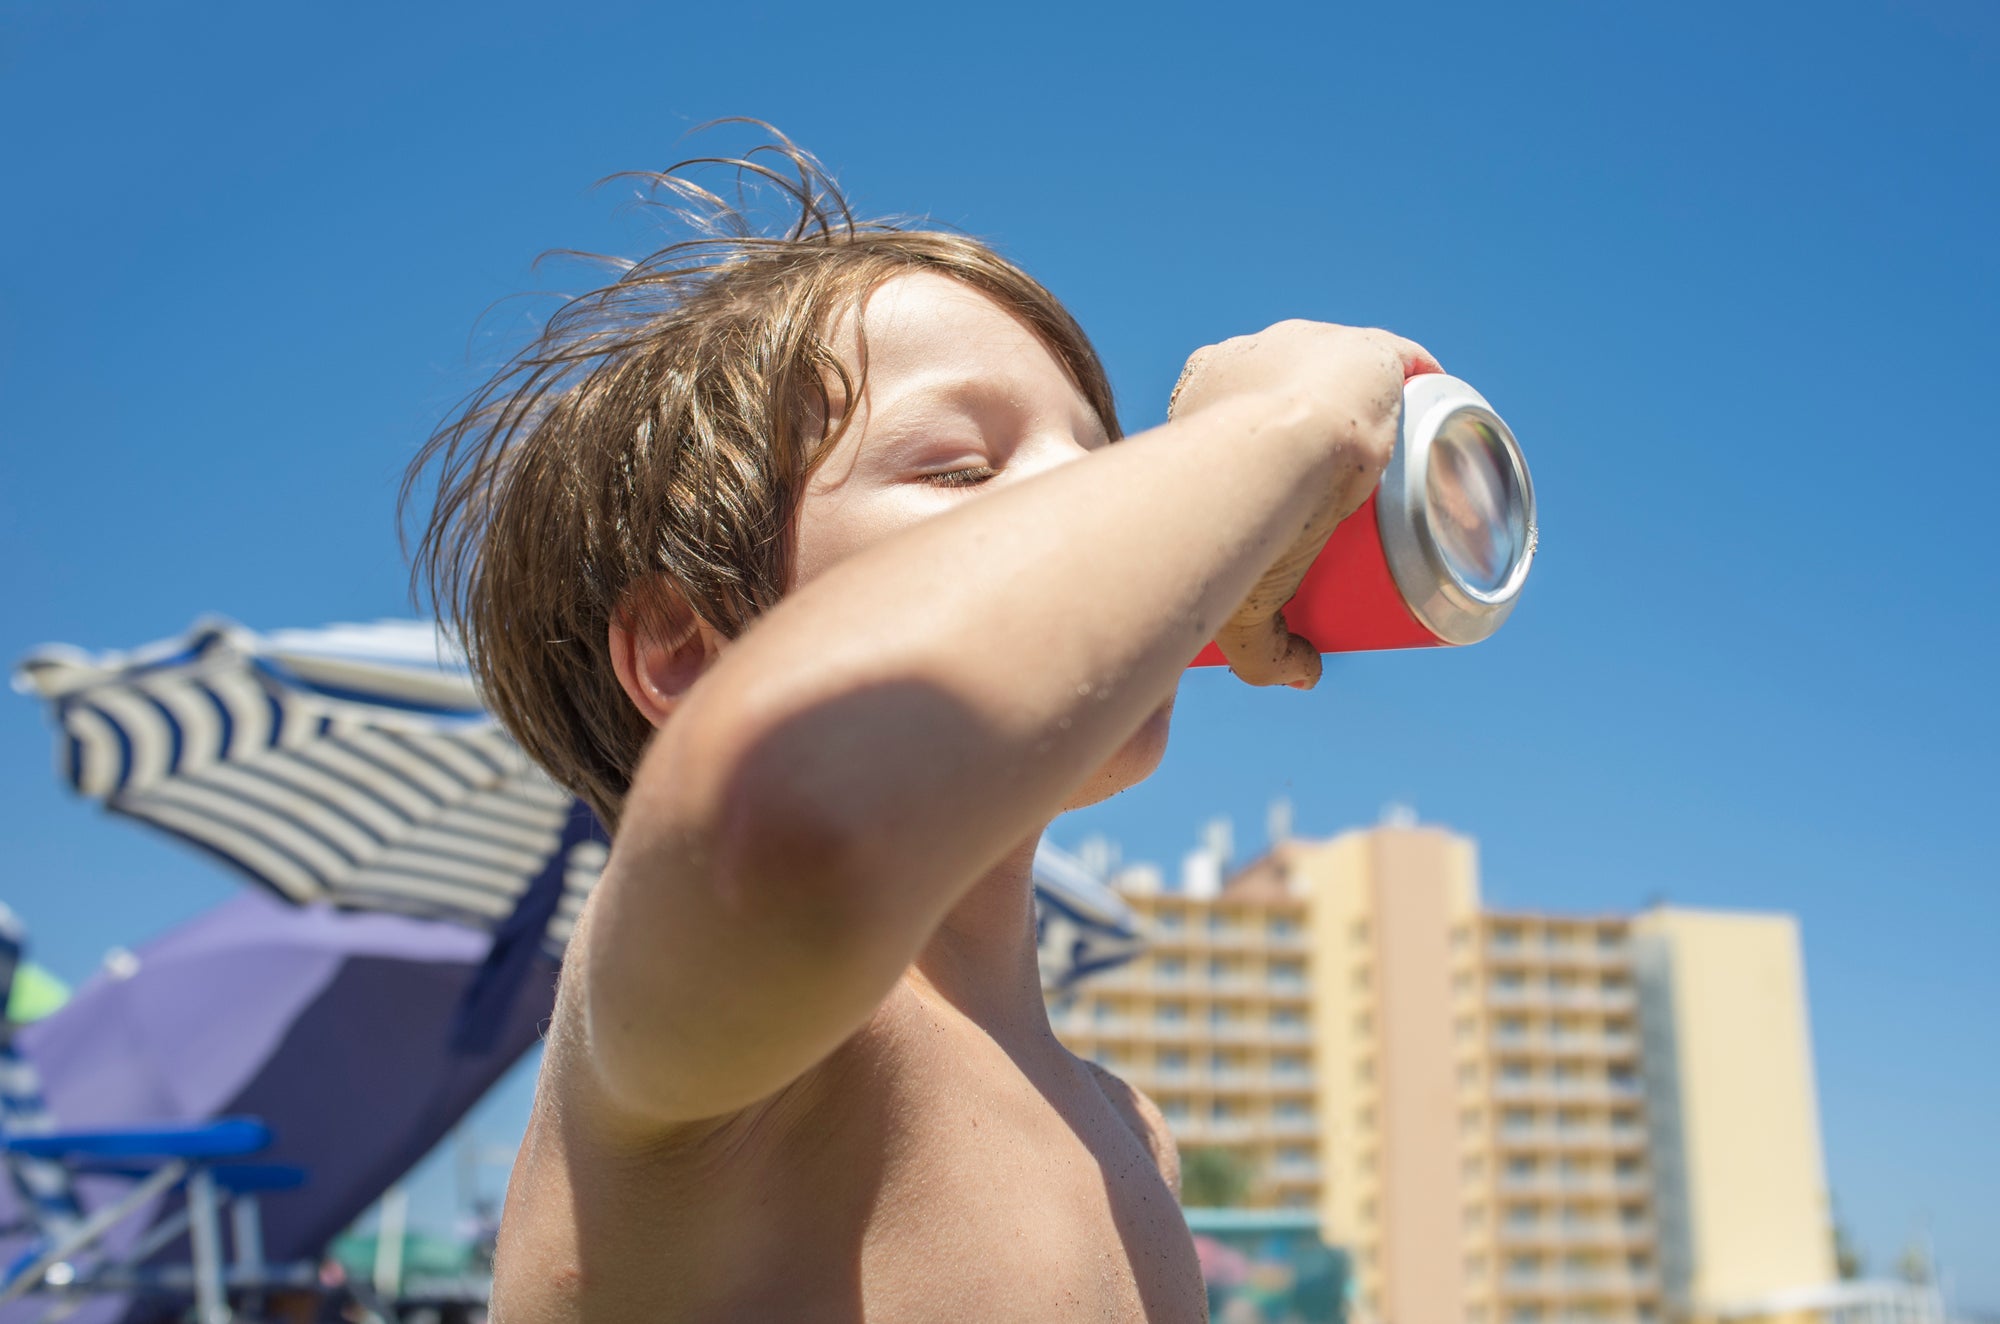 Child drinking from a can